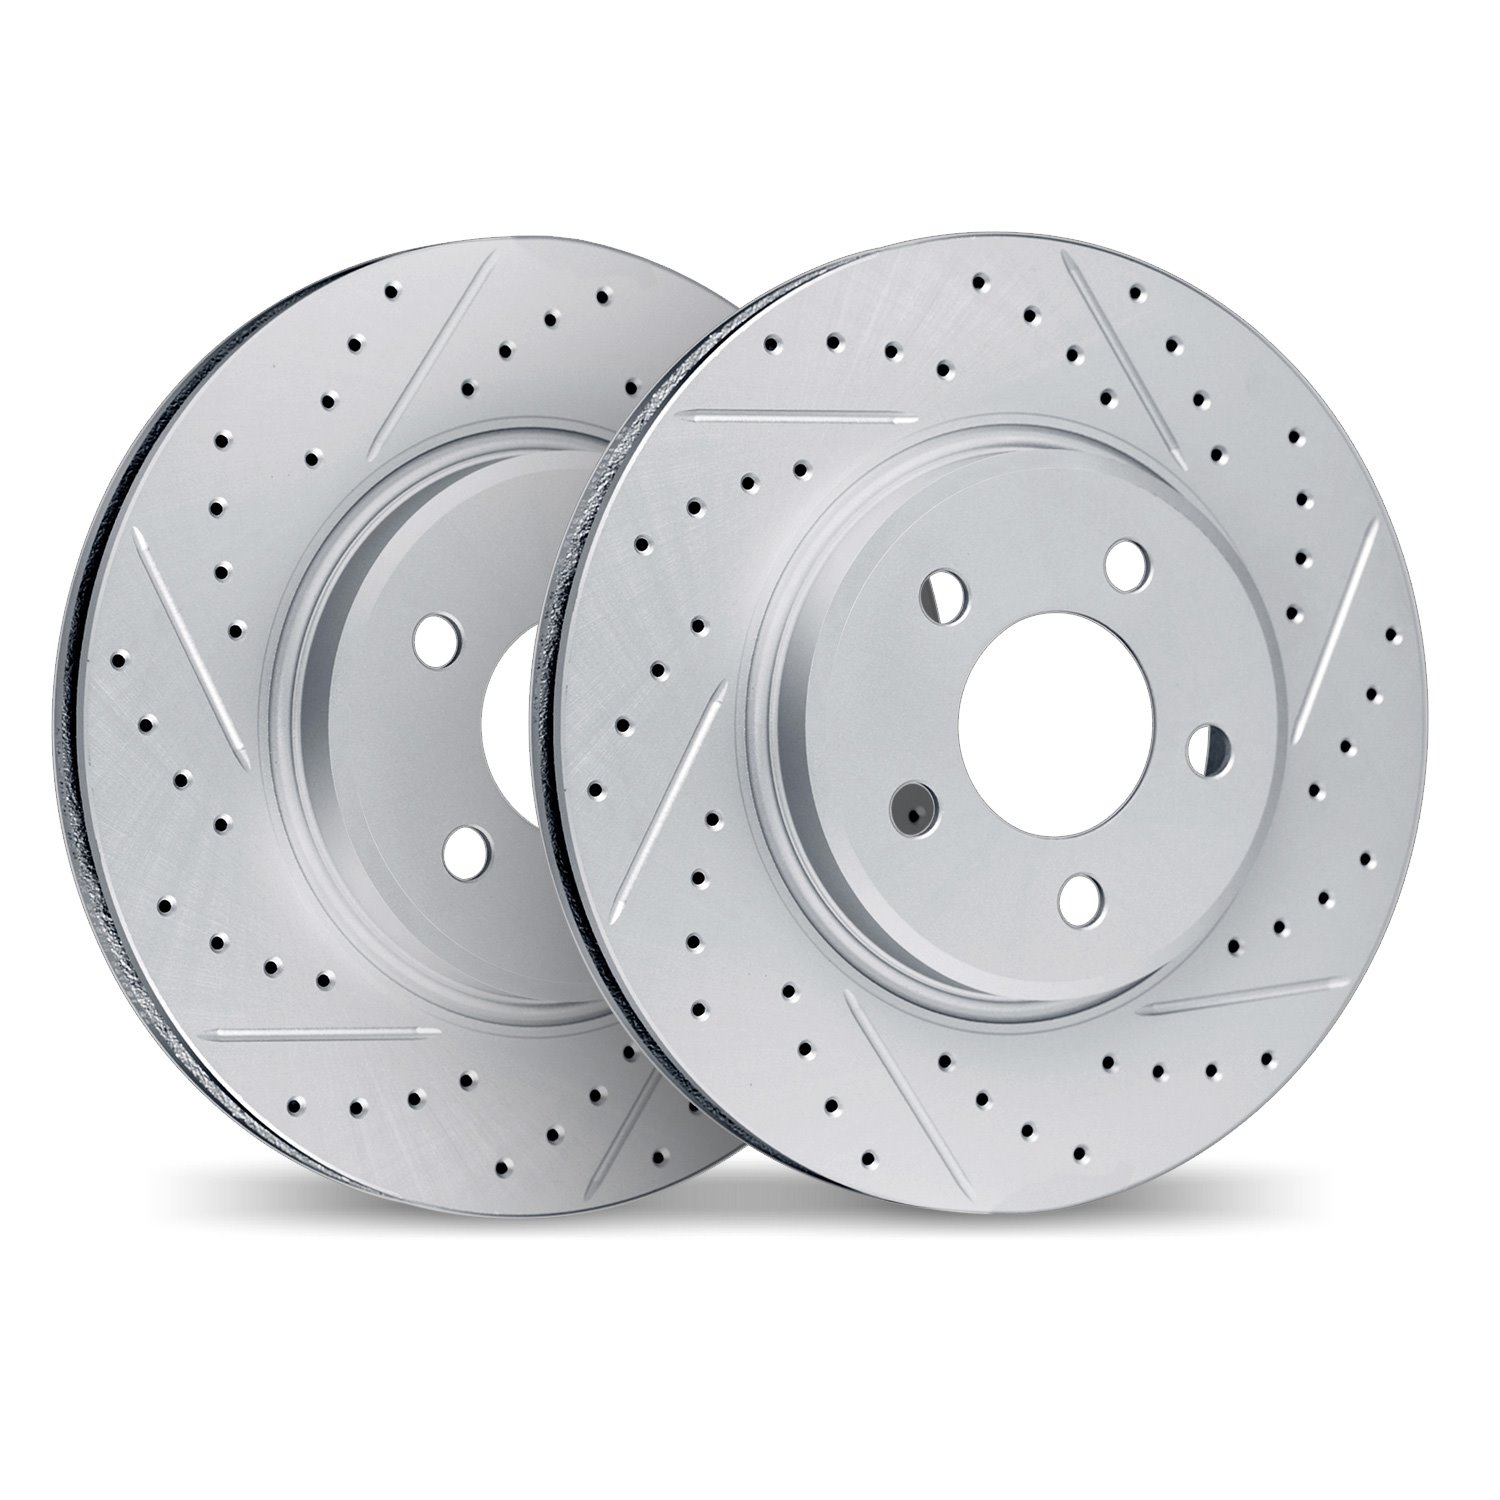 2002-54010 Geoperformance Drilled/Slotted Brake Rotors, 1994-2003 Ford/Lincoln/Mercury/Mazda, Position: Front